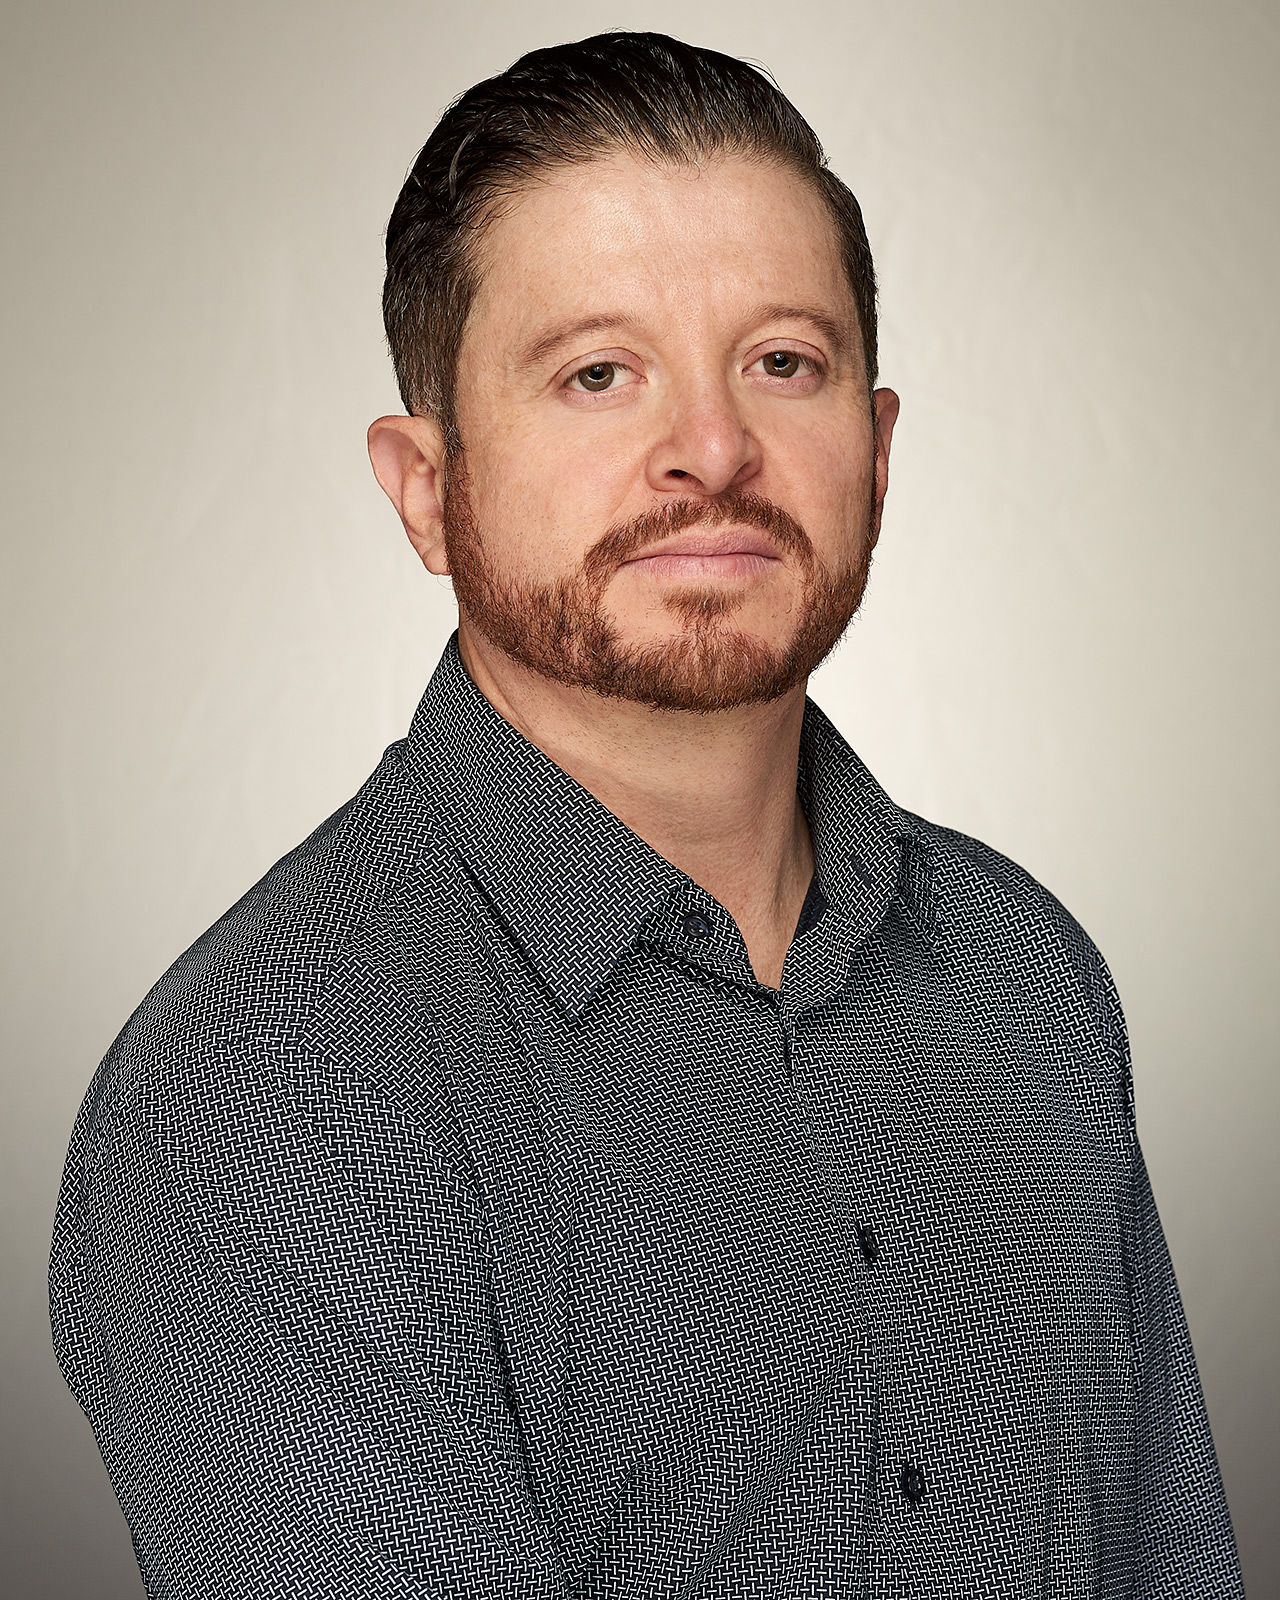 A man in a LinkedIn headshot in Los Angeles made by The Light Committee